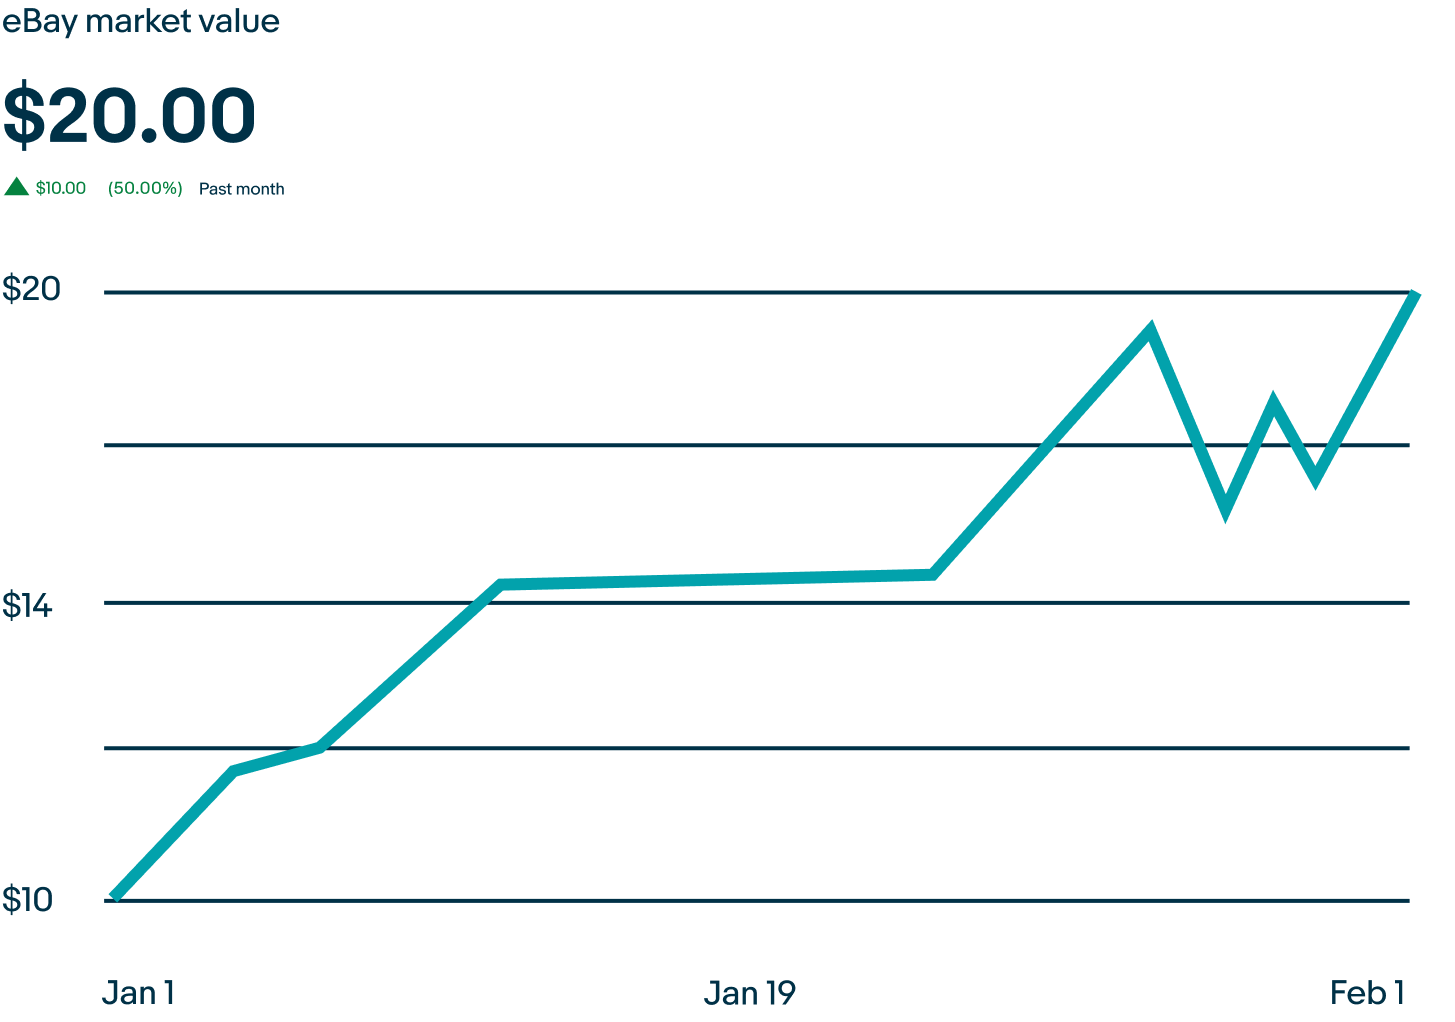 Line graph indicating the increasing average sold price of the Mike Trout baseball card, from $10 to $20.